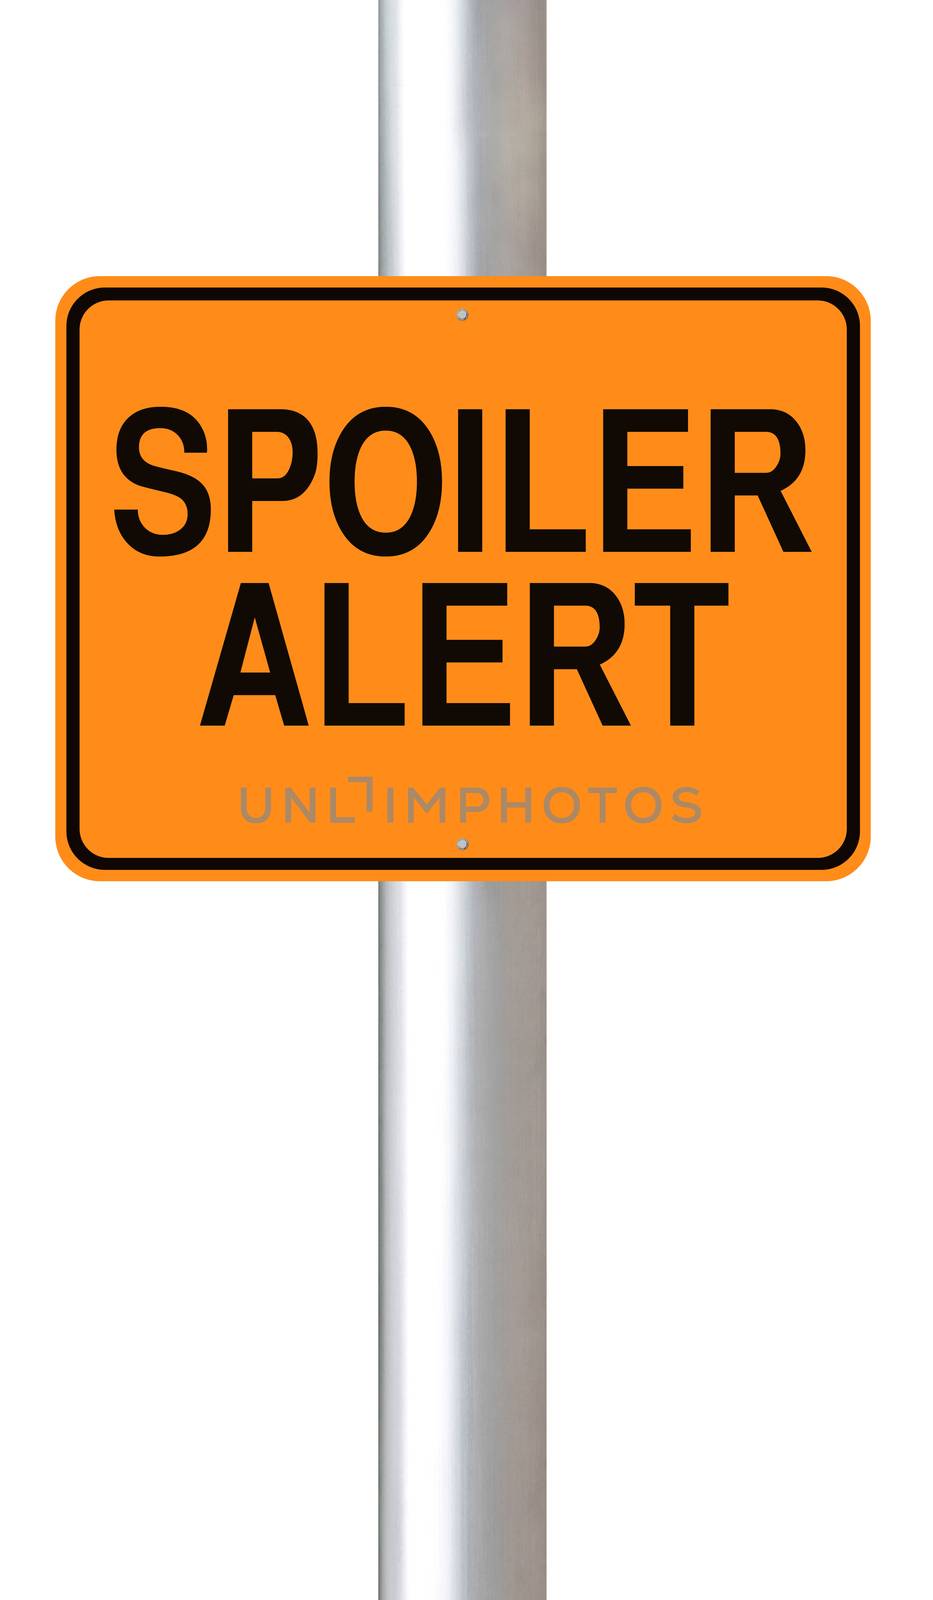 A road sign warning of a spoiler alert